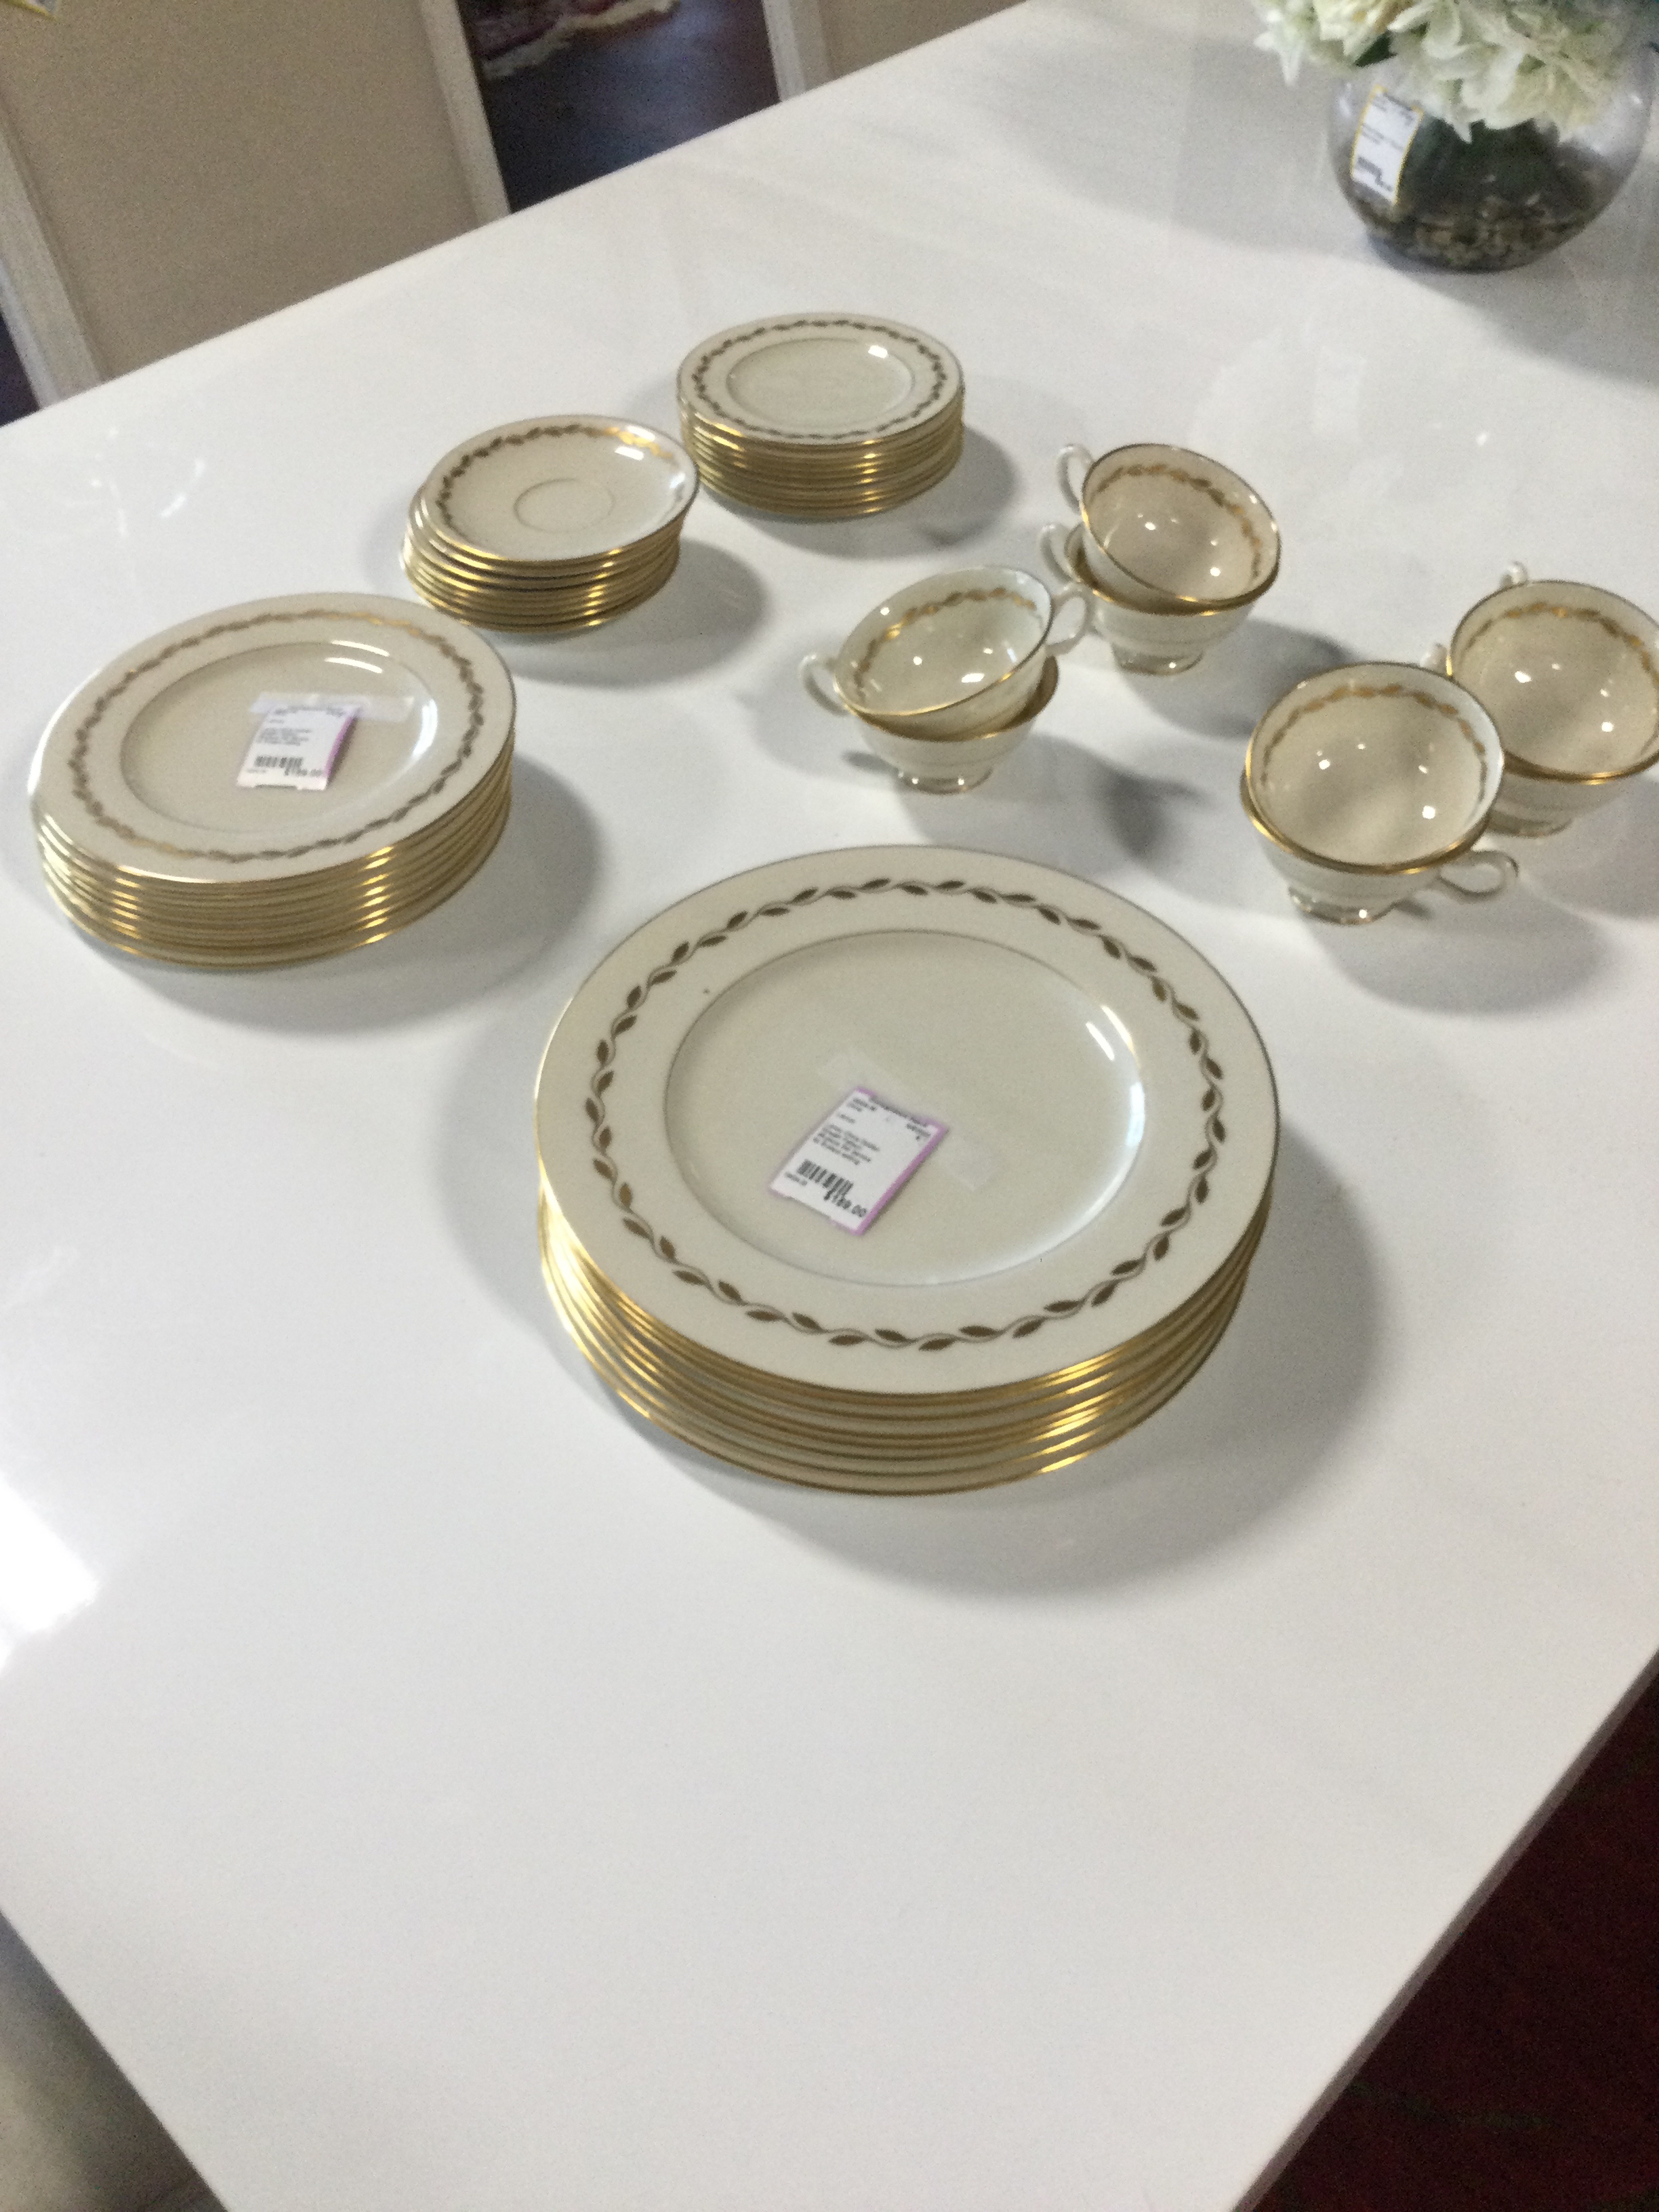 Lenox-China-Golden-Wreath-Pattern-48-piece-Set-Service-for-8-place-setting_126127A.jpg